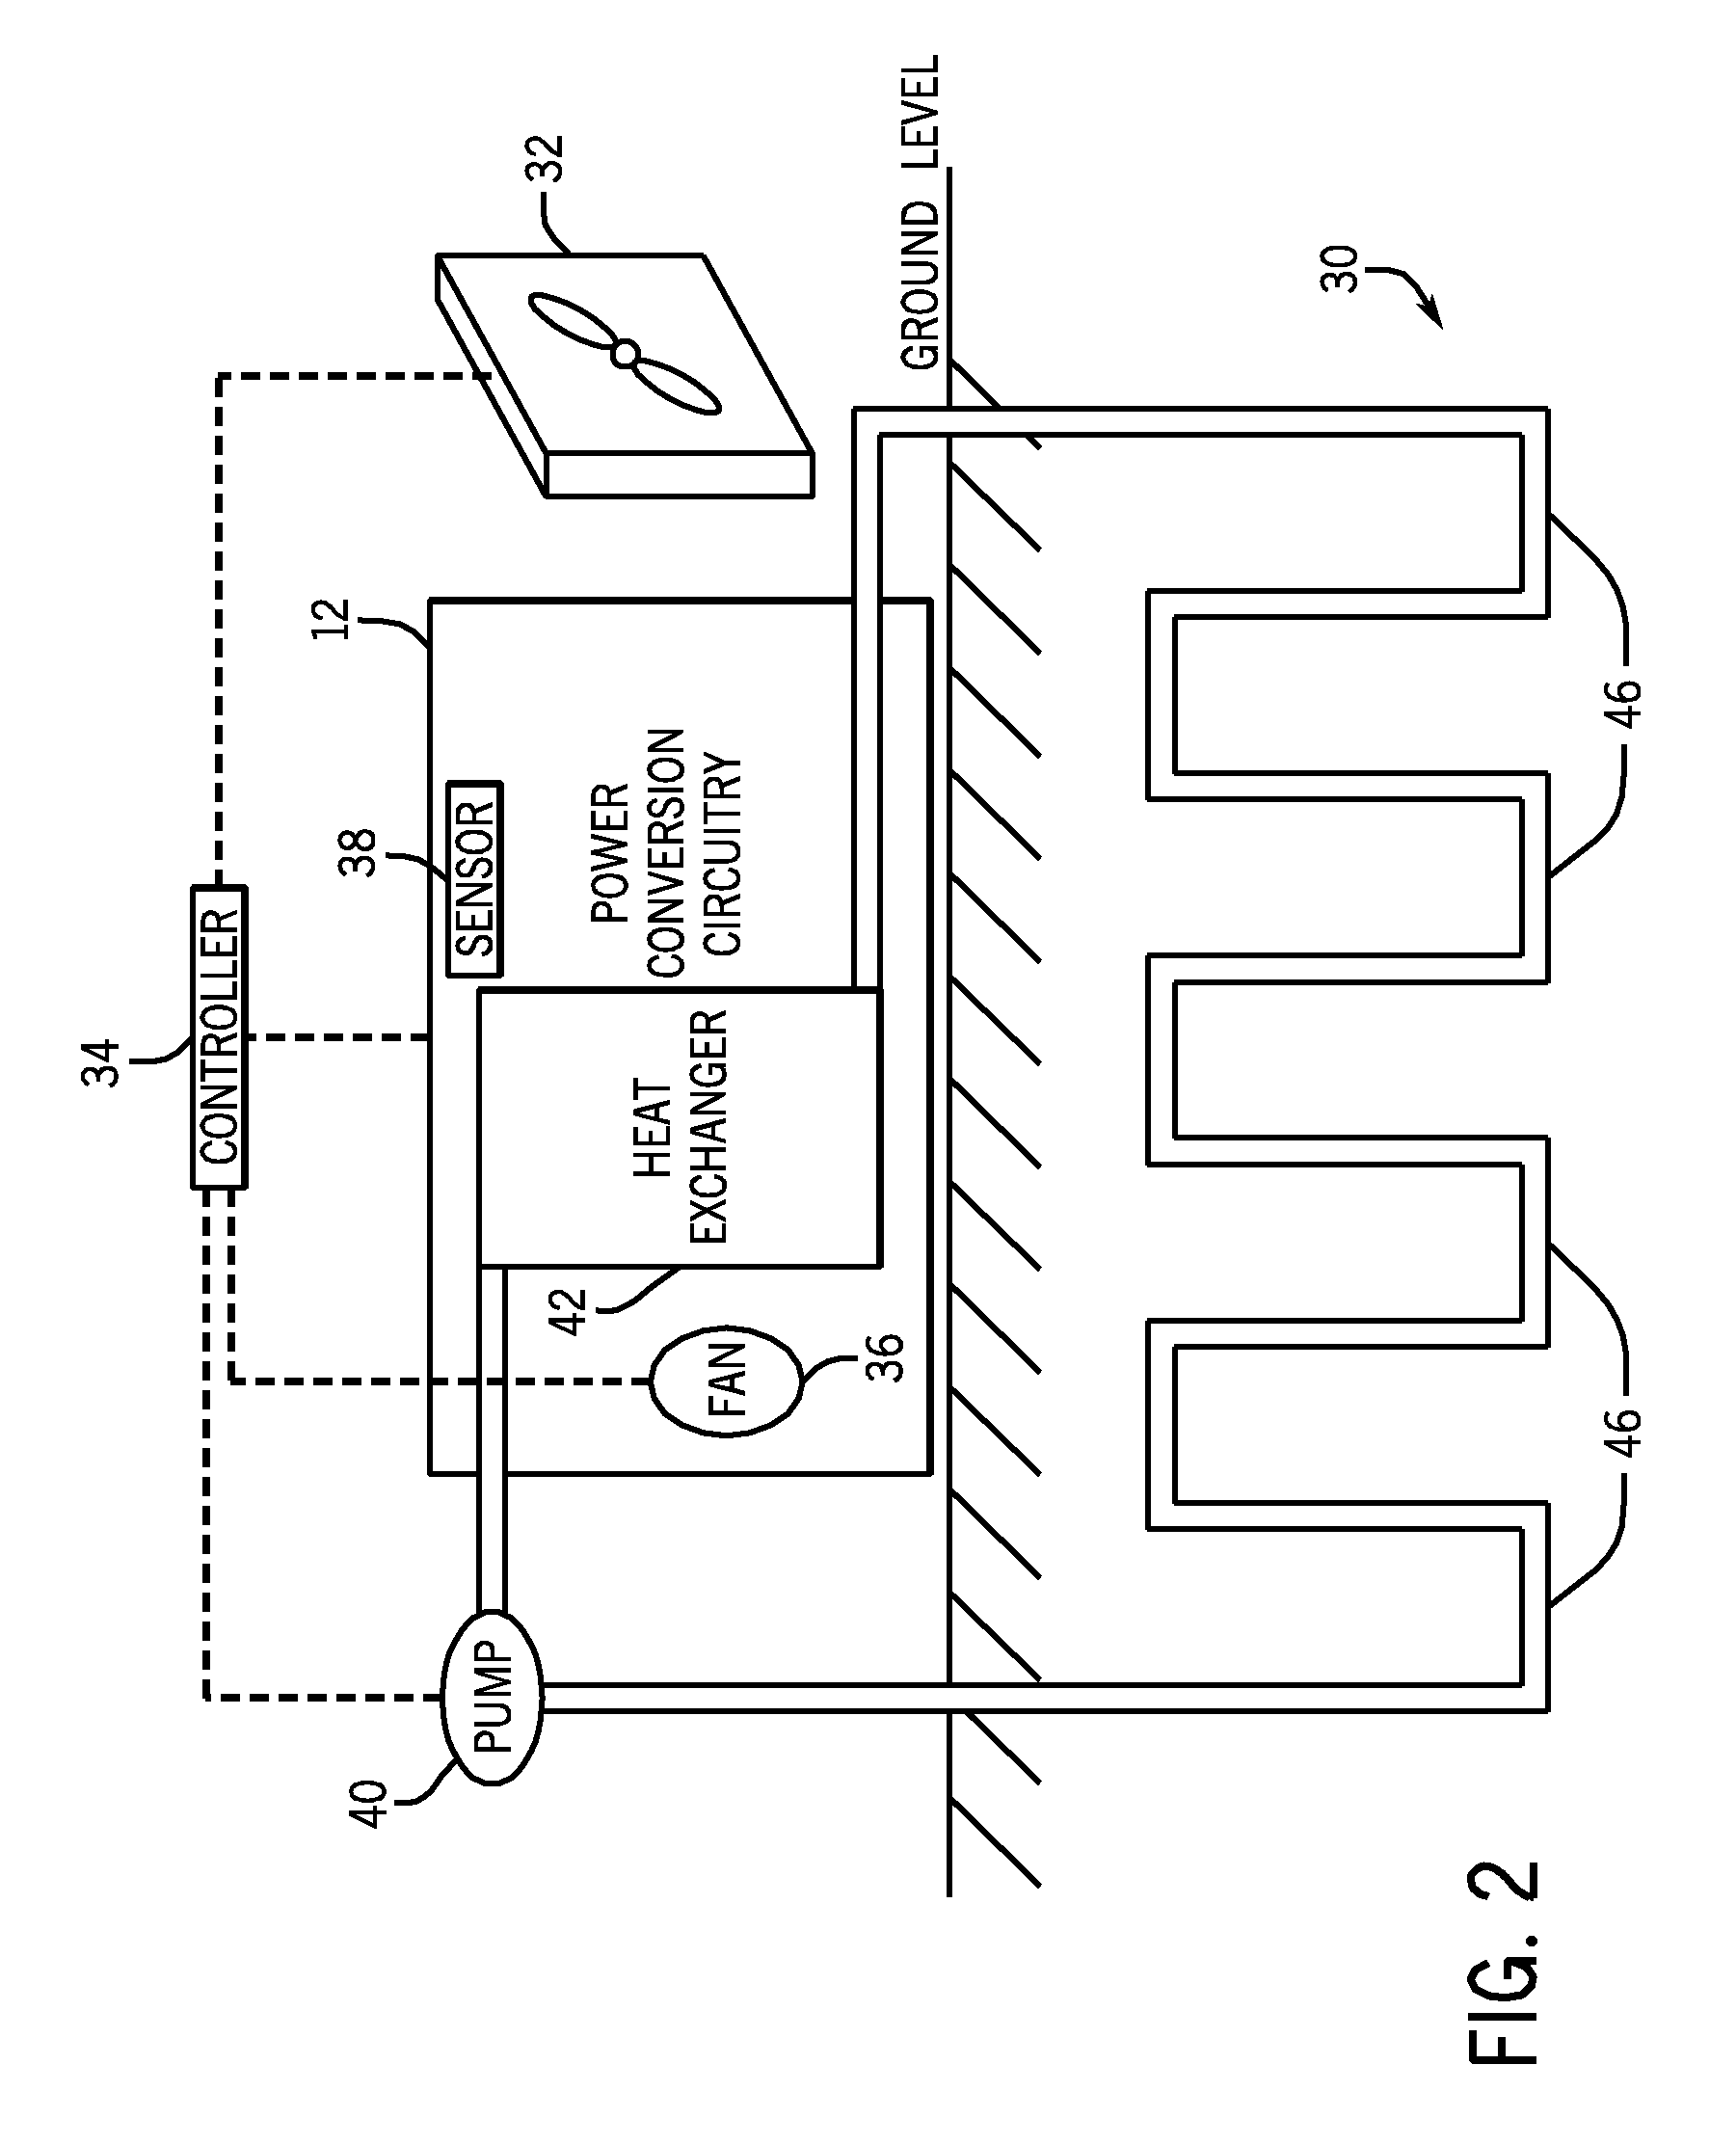 Geothermally cooled power conversion system